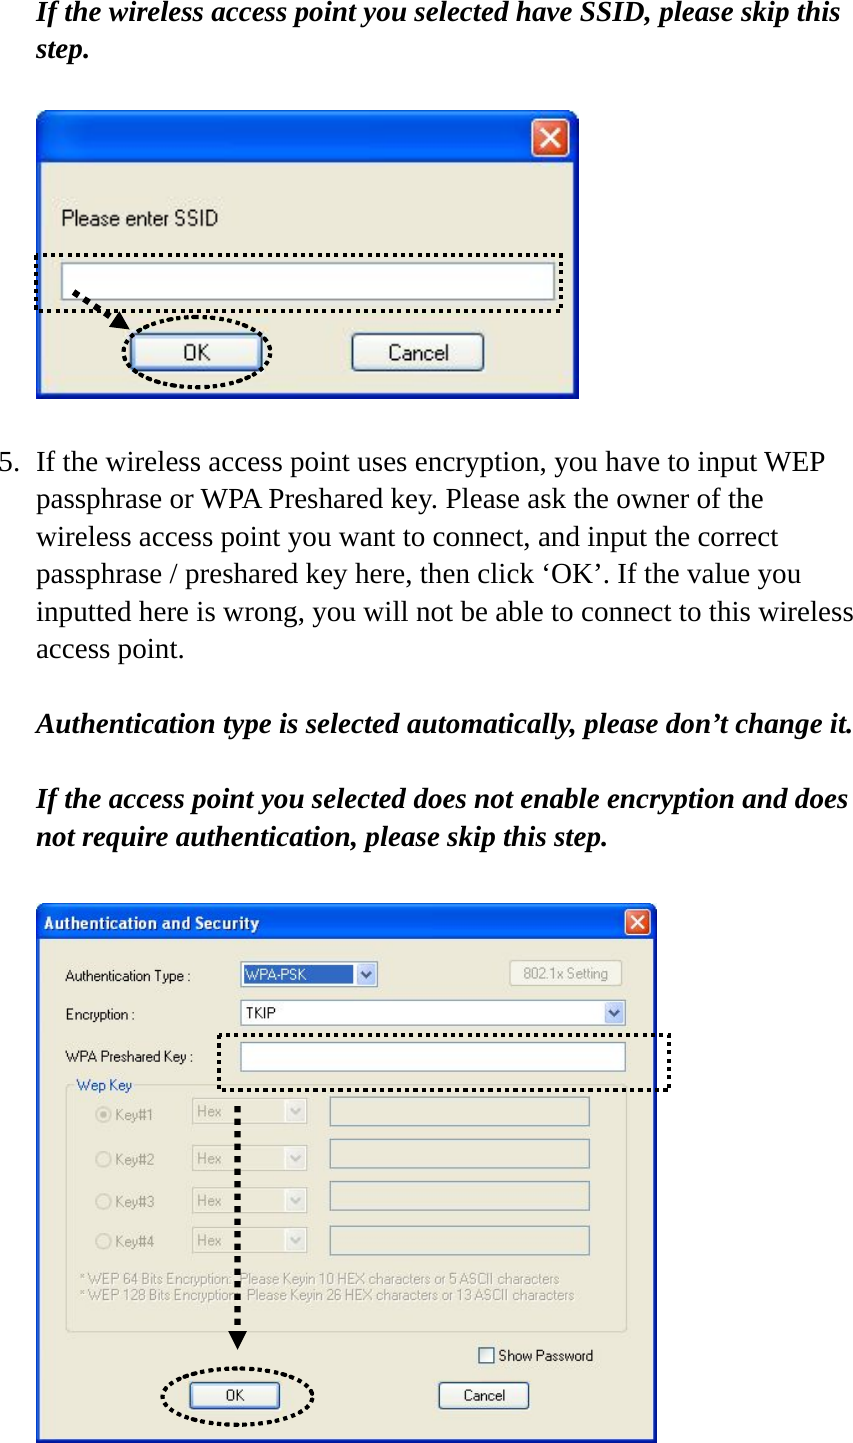 If the wireless access point you selected have SSID, please skip this step.    5. If the wireless access point uses encryption, you have to input WEP passphrase or WPA Preshared key. Please ask the owner of the wireless access point you want to connect, and input the correct passphrase / preshared key here, then click ‘OK’. If the value you inputted here is wrong, you will not be able to connect to this wireless access point.  Authentication type is selected automatically, please don’t change it.    If the access point you selected does not enable encryption and does not require authentication, please skip this step.   